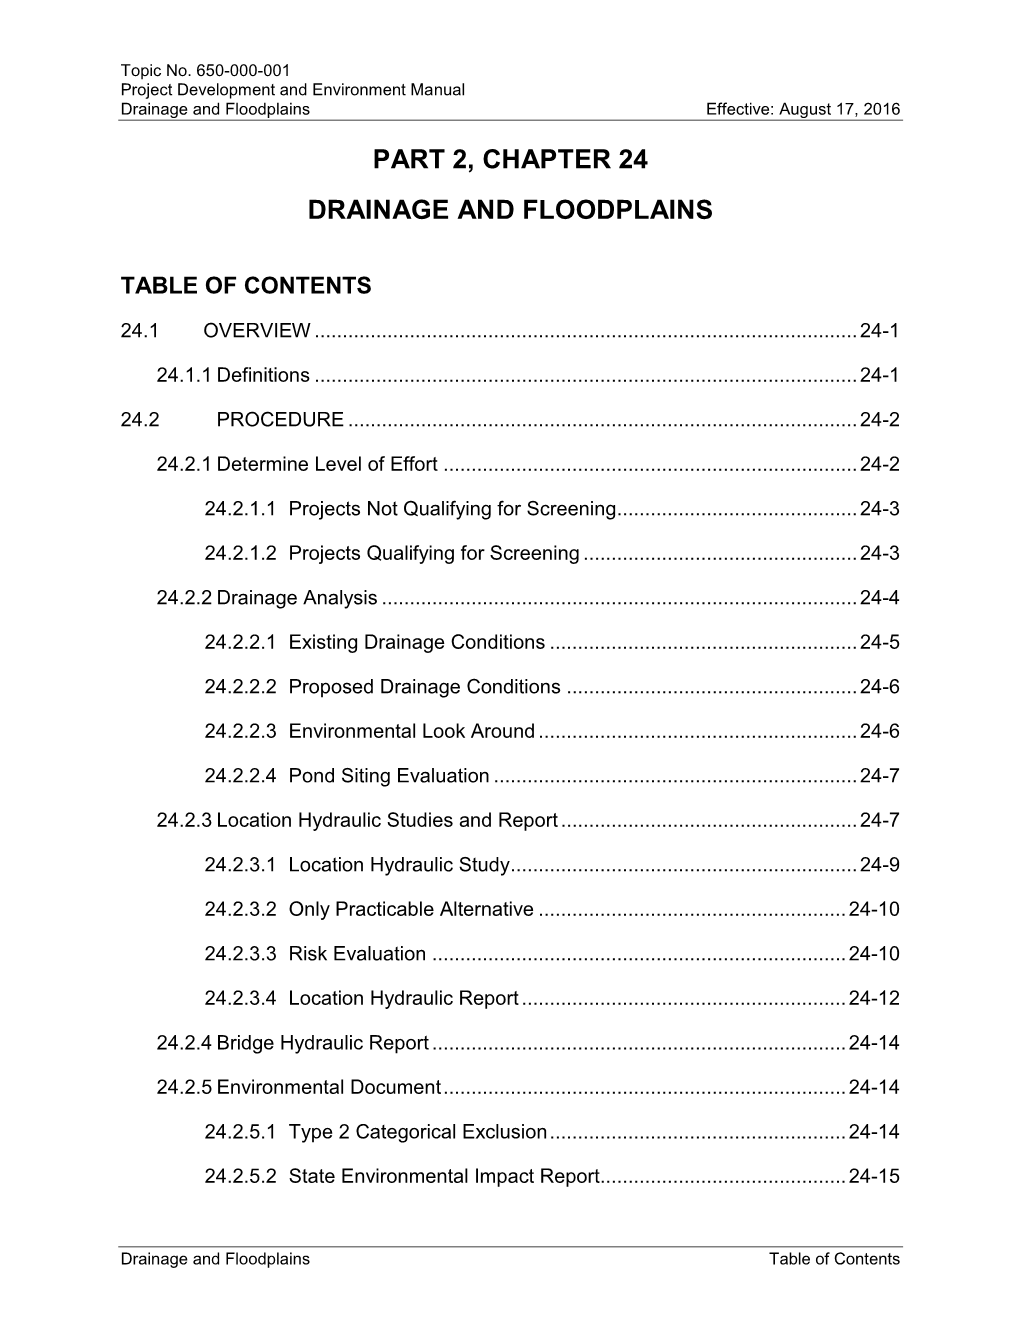 Part 2, Chapter 24 Drainage and Floodplains